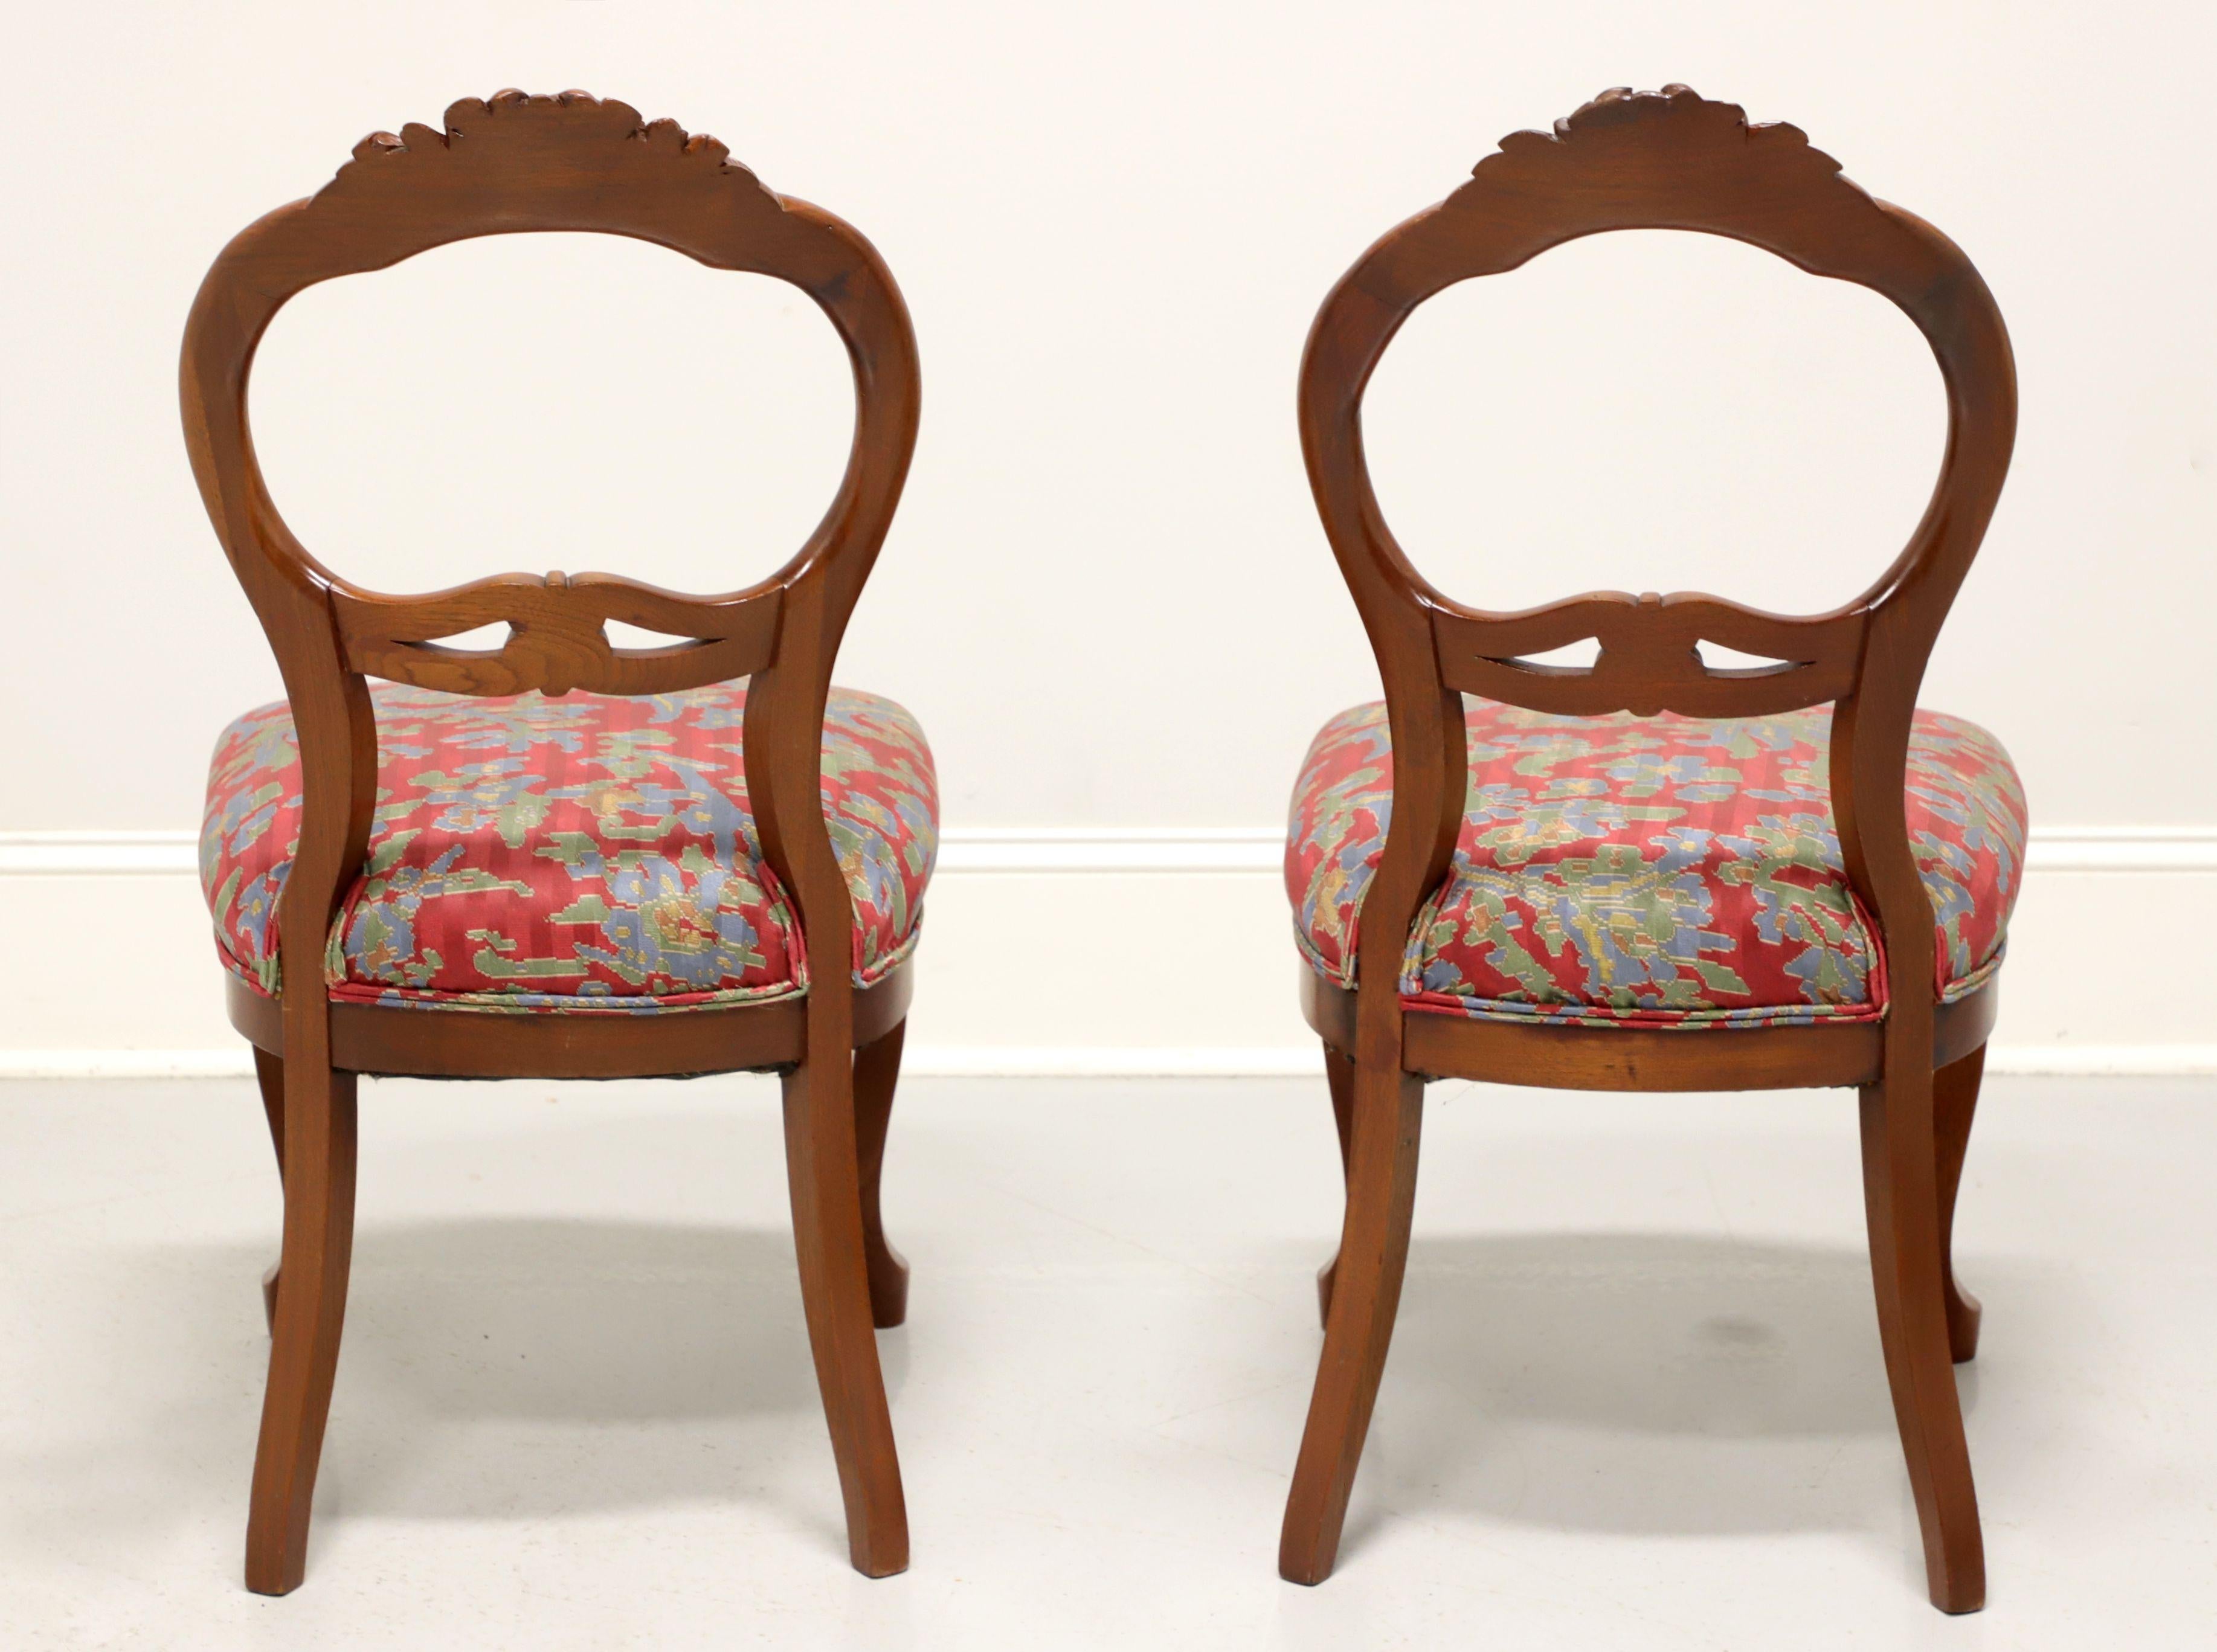 Fabric Antique Early 20th Century Walnut Victorian Balloon Back Side Chairs - Pair For Sale